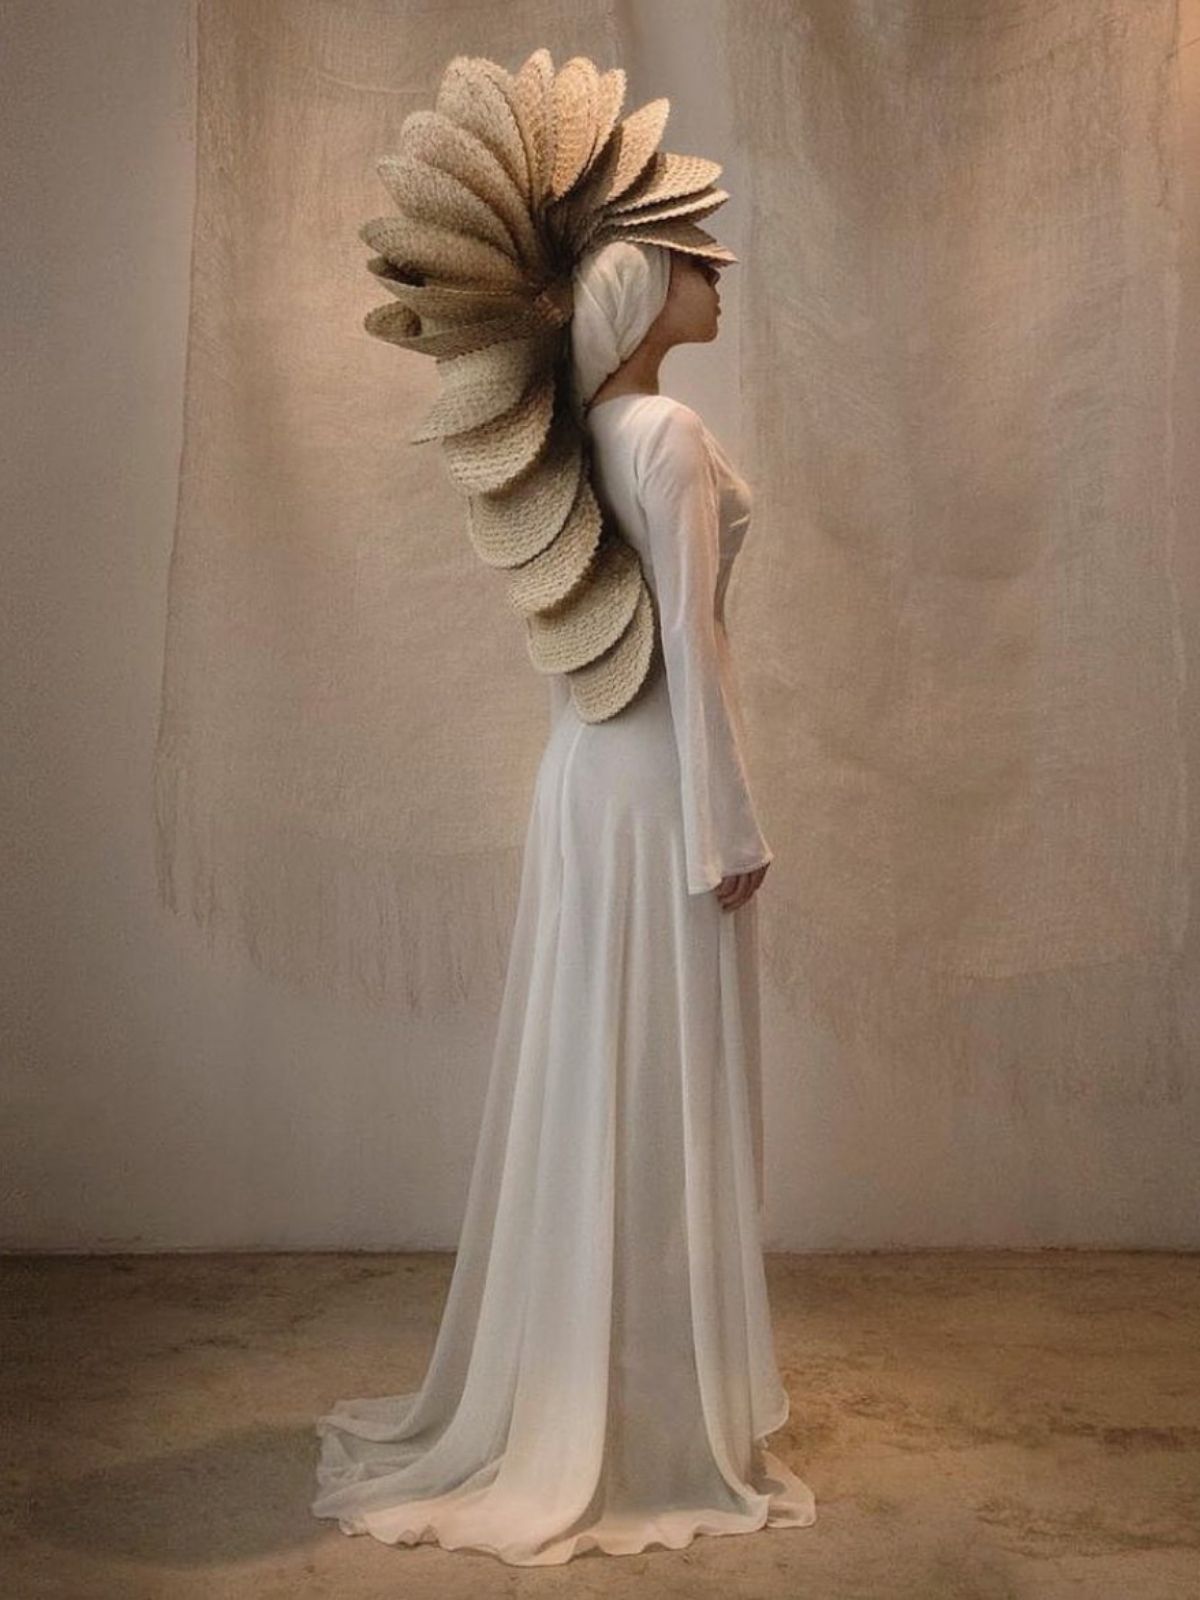 Sculptural Garments Made from Organic Materials - Mono Giraud - The art tree hats - article on thursd